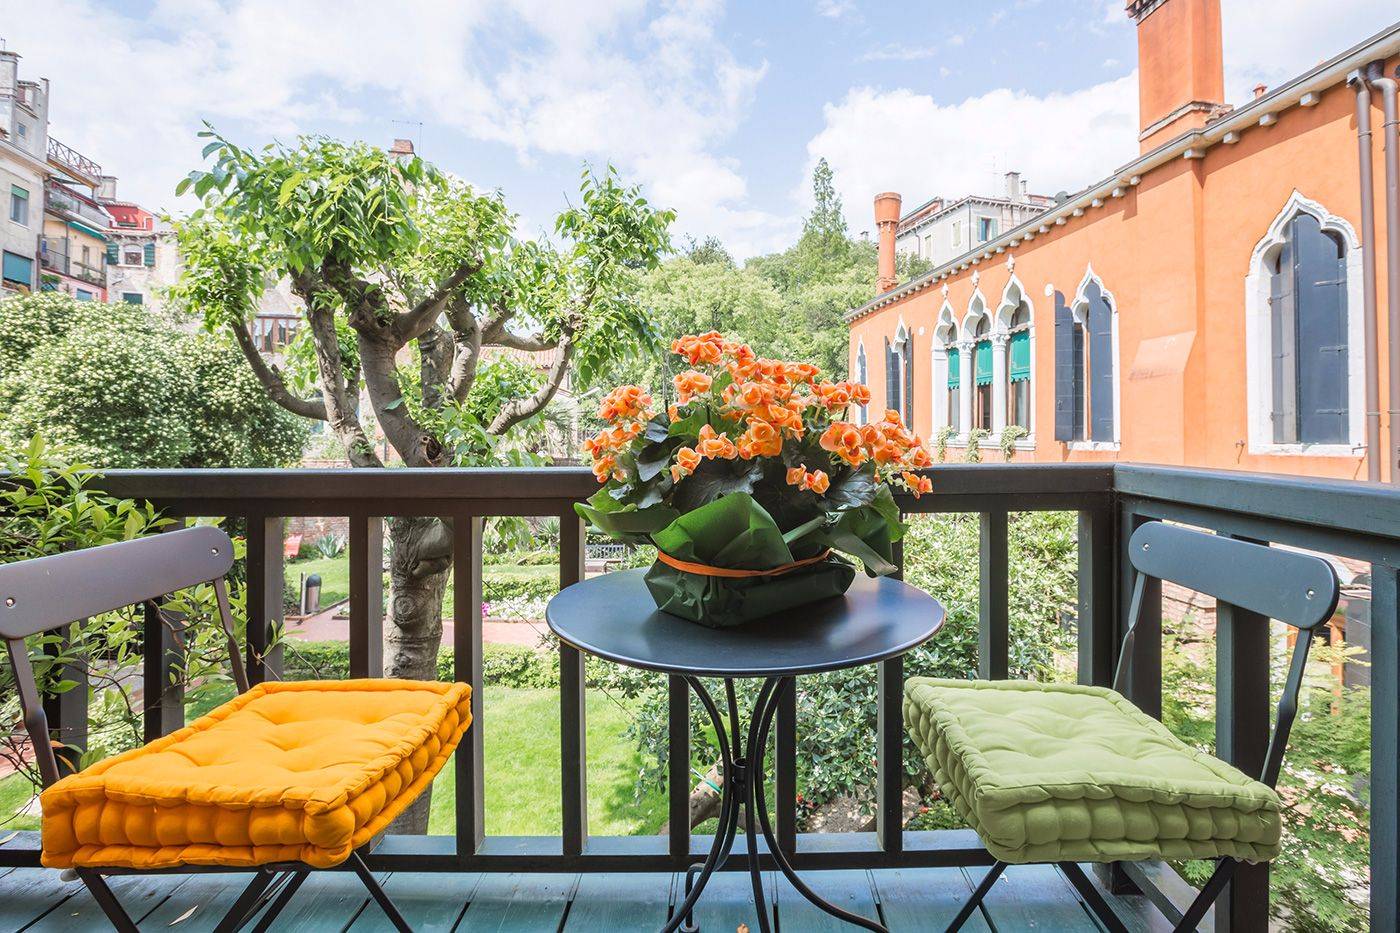 relax on the little terrace facing the gardens at the Veronese apartment in Venice